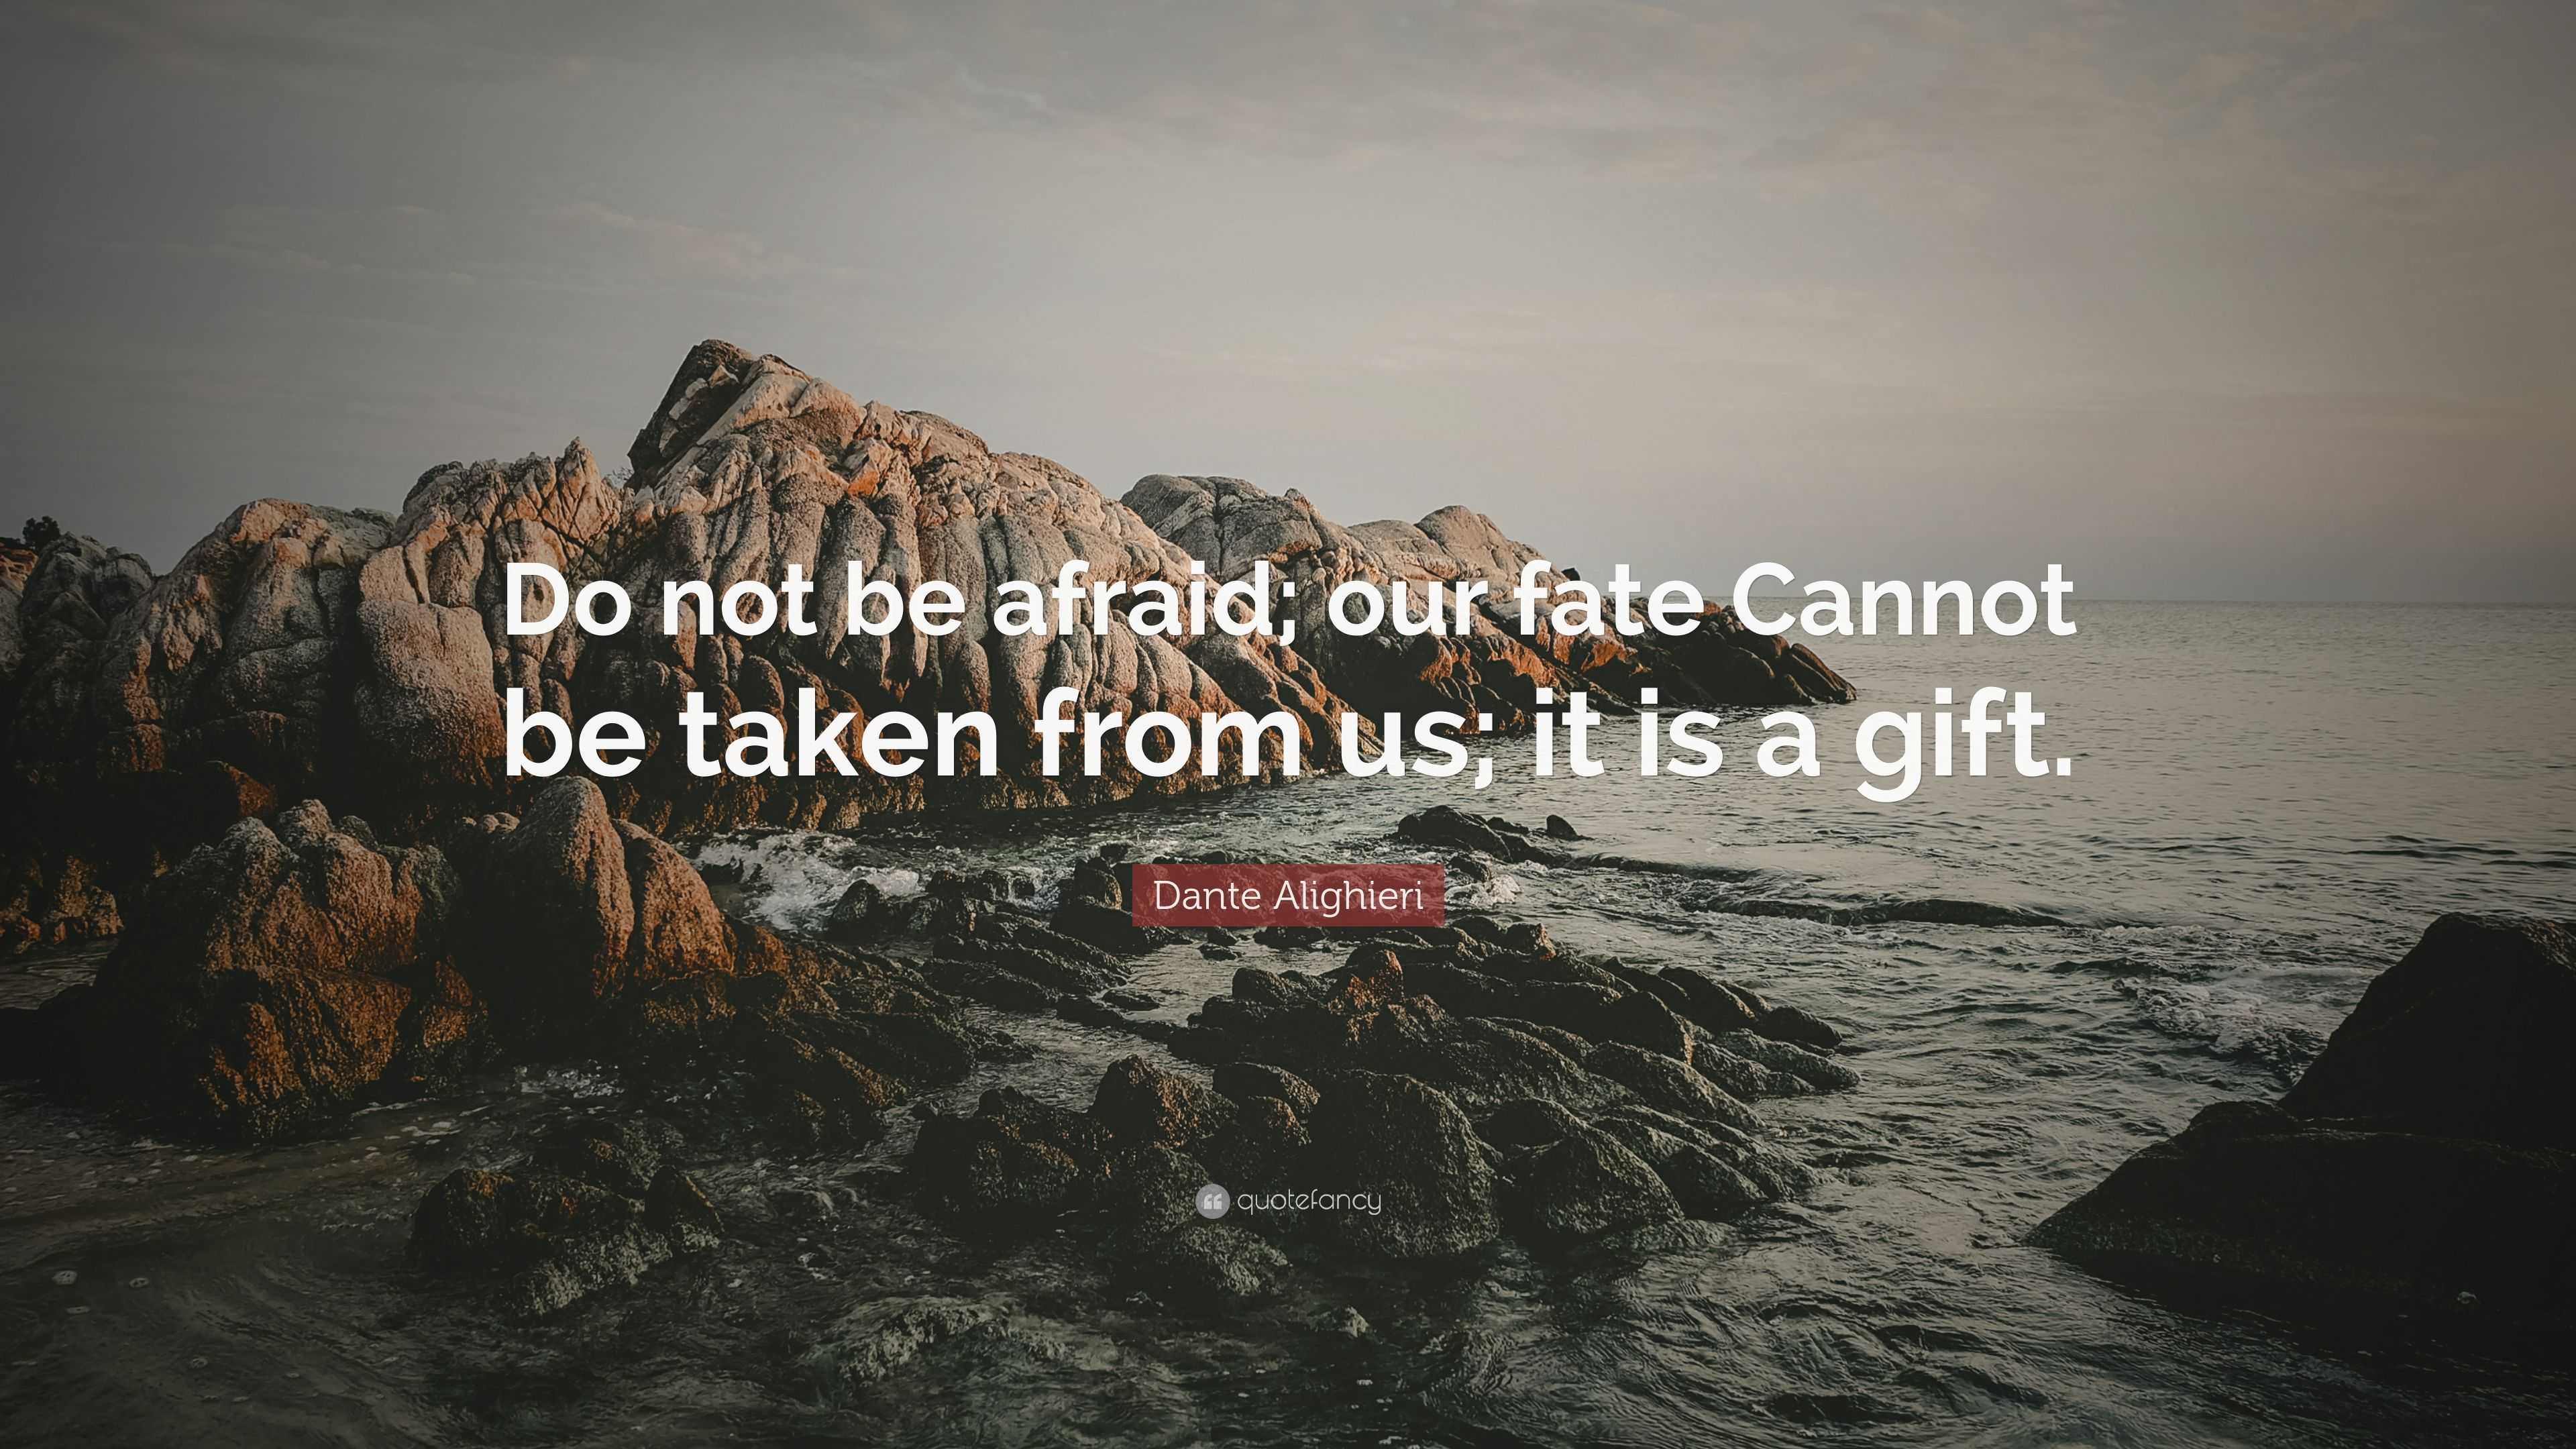 Dante Alighieri Quote: “Do not be afraid; our fate Cannot be taken from ...